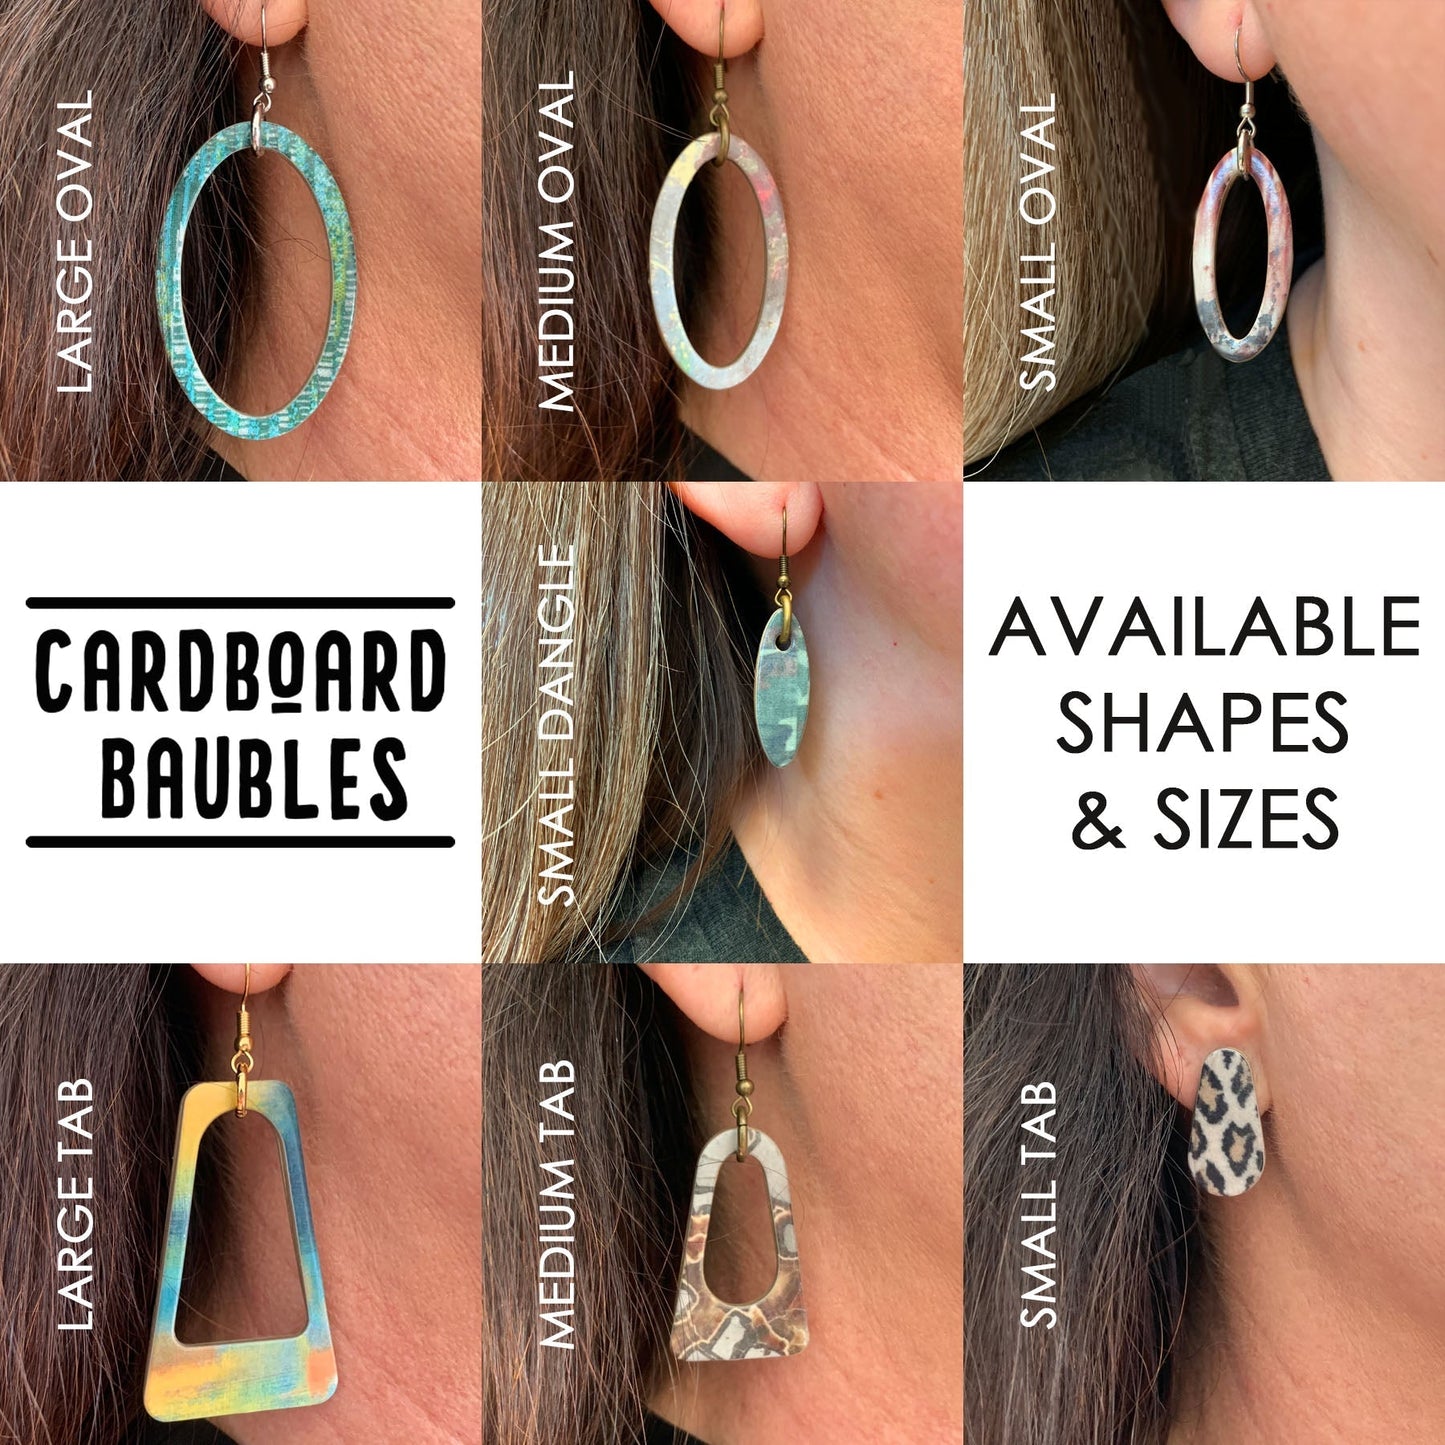 HAND TOOLED - Oval Cardboard Baubles Earrings